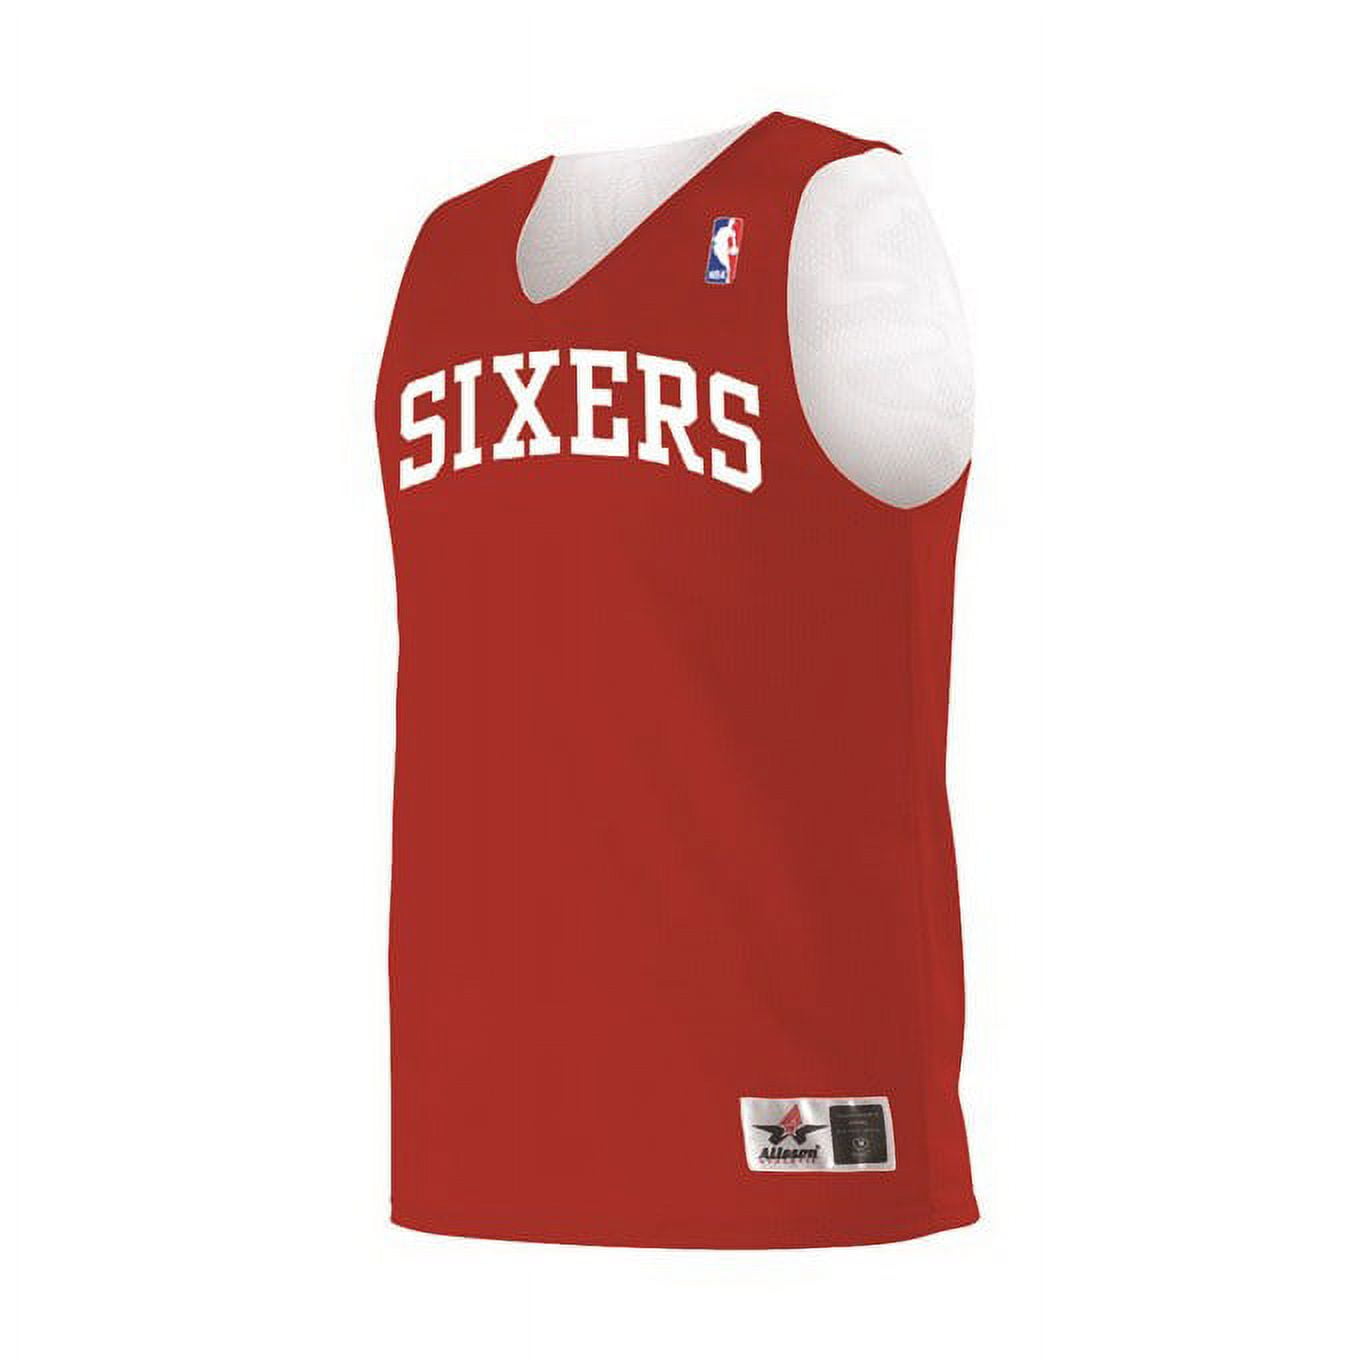 Alleson Athletic B54785295 Youth NBA Logod Reversible Jersey,